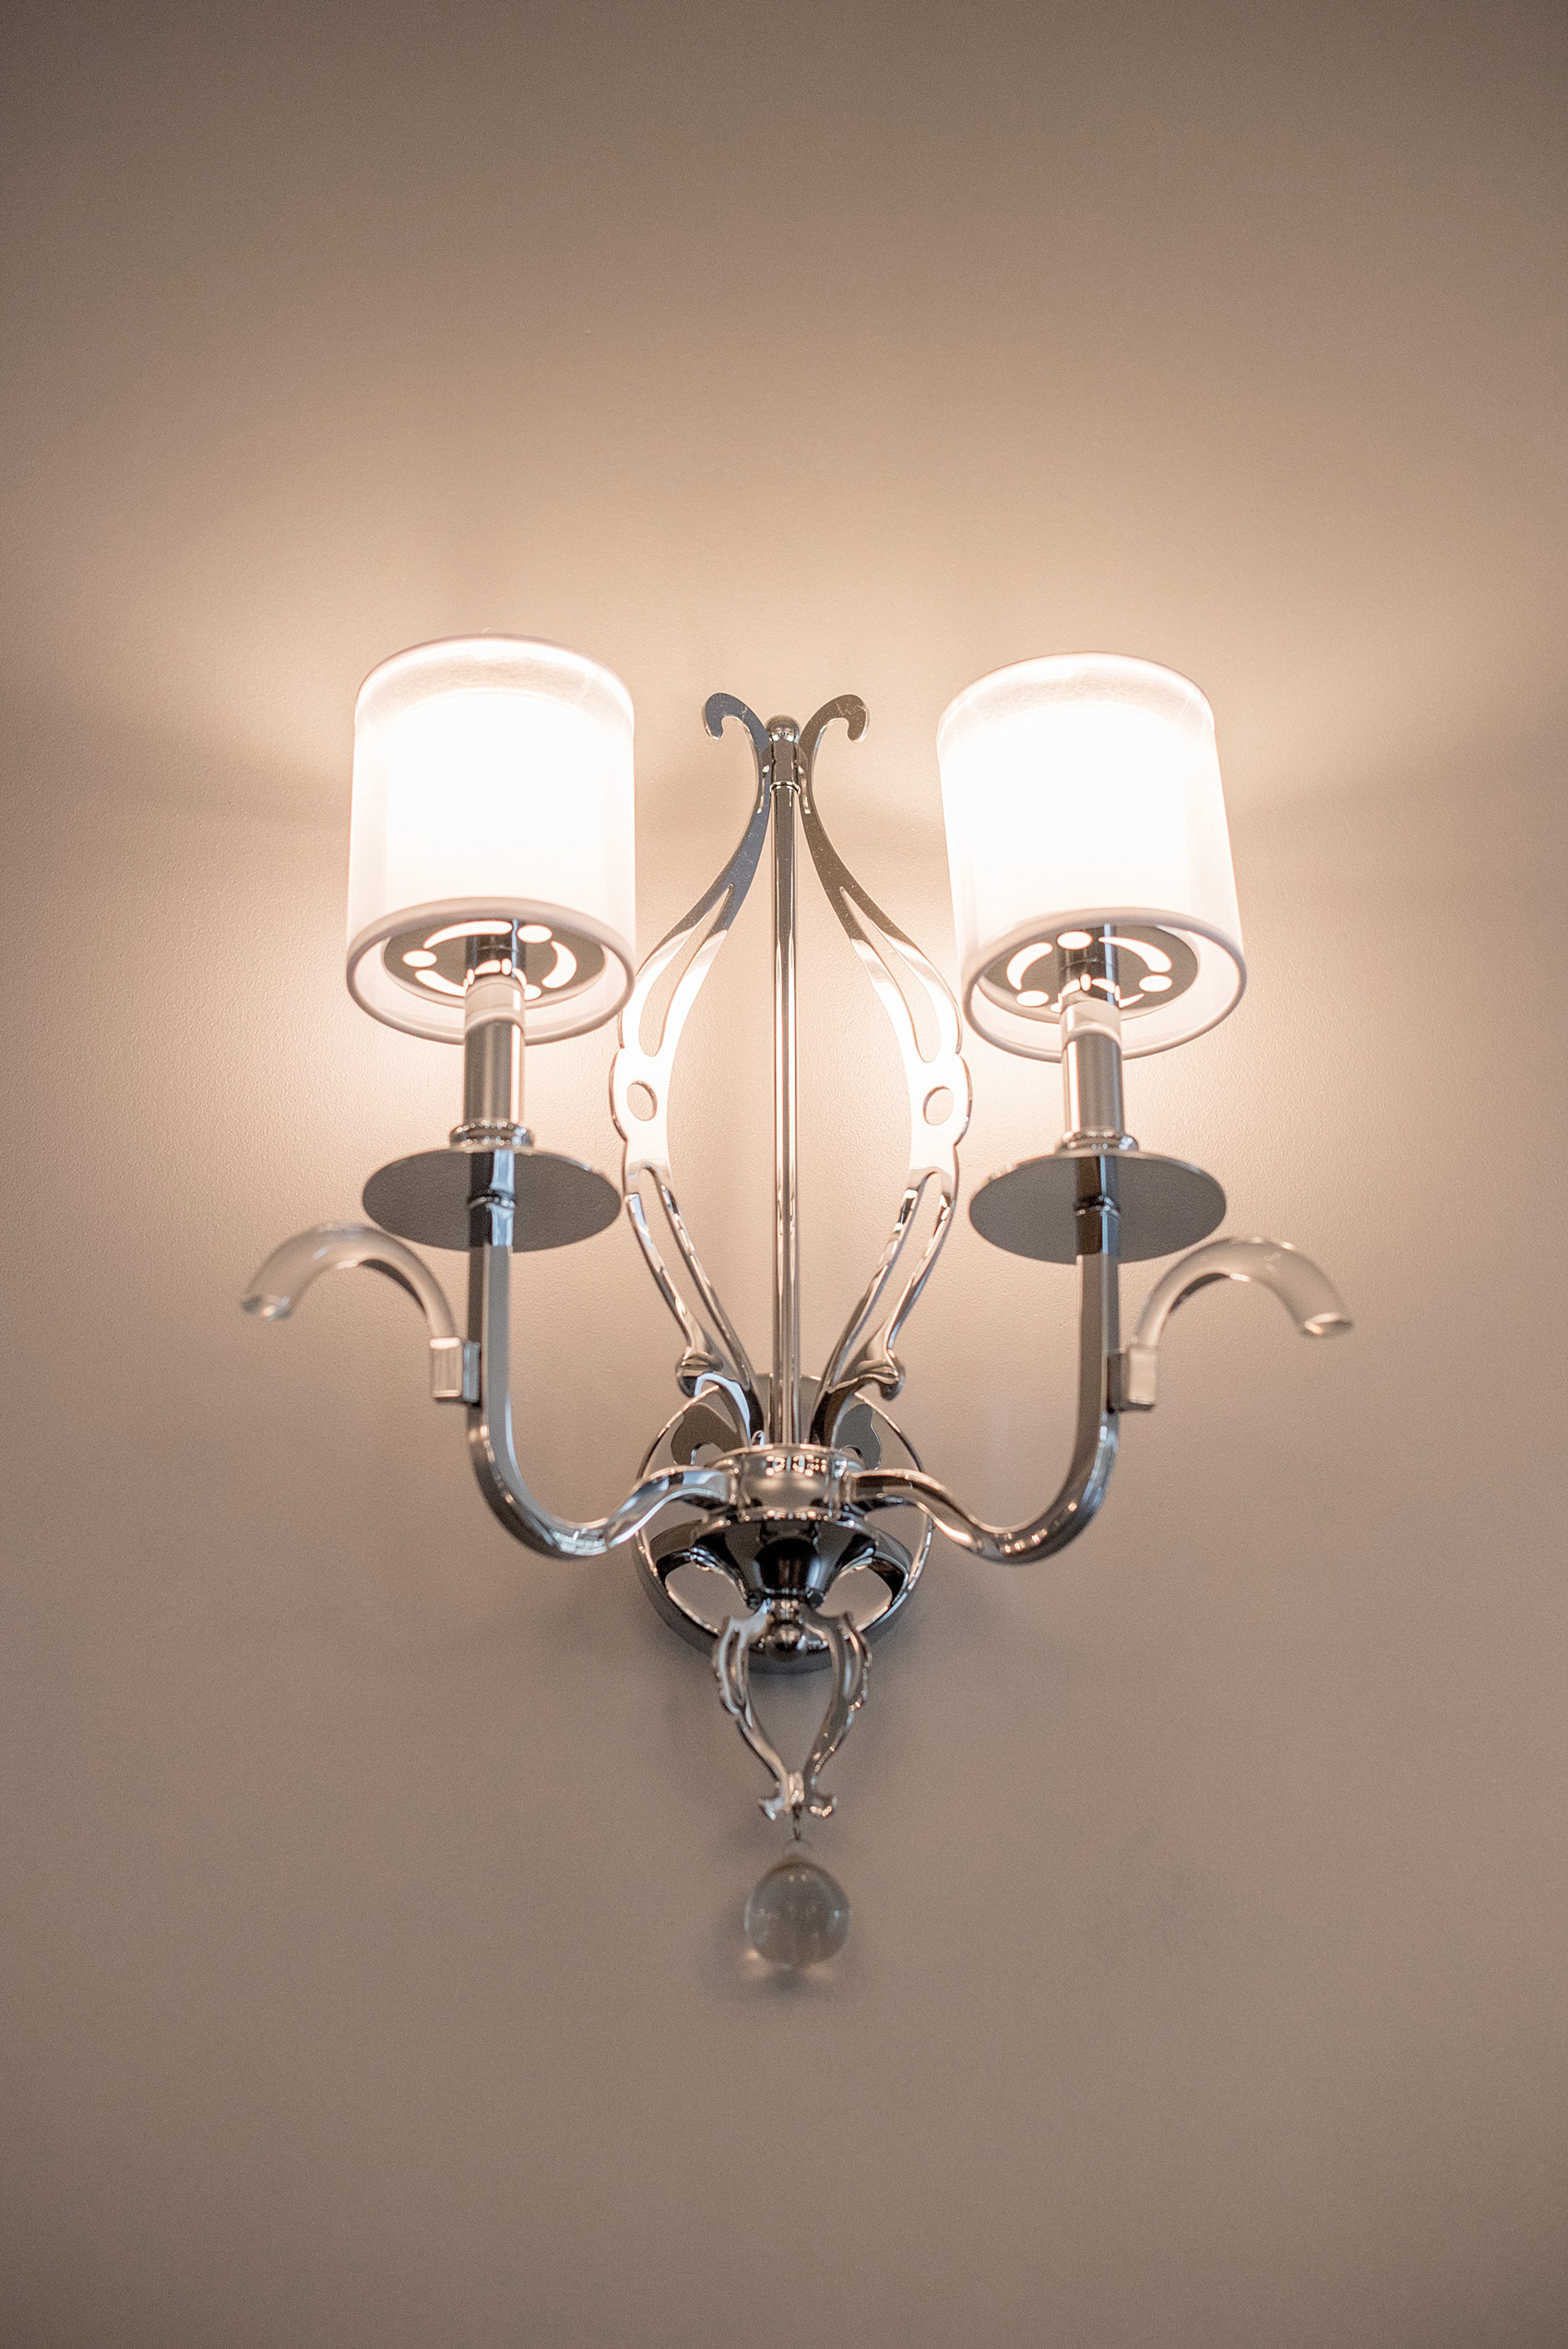 Mikkel Paige Photography, Raleigh wedding photographer, photos of The Mayton Inn hotel and venue in Cary, NC. Silver modern sconce detail.